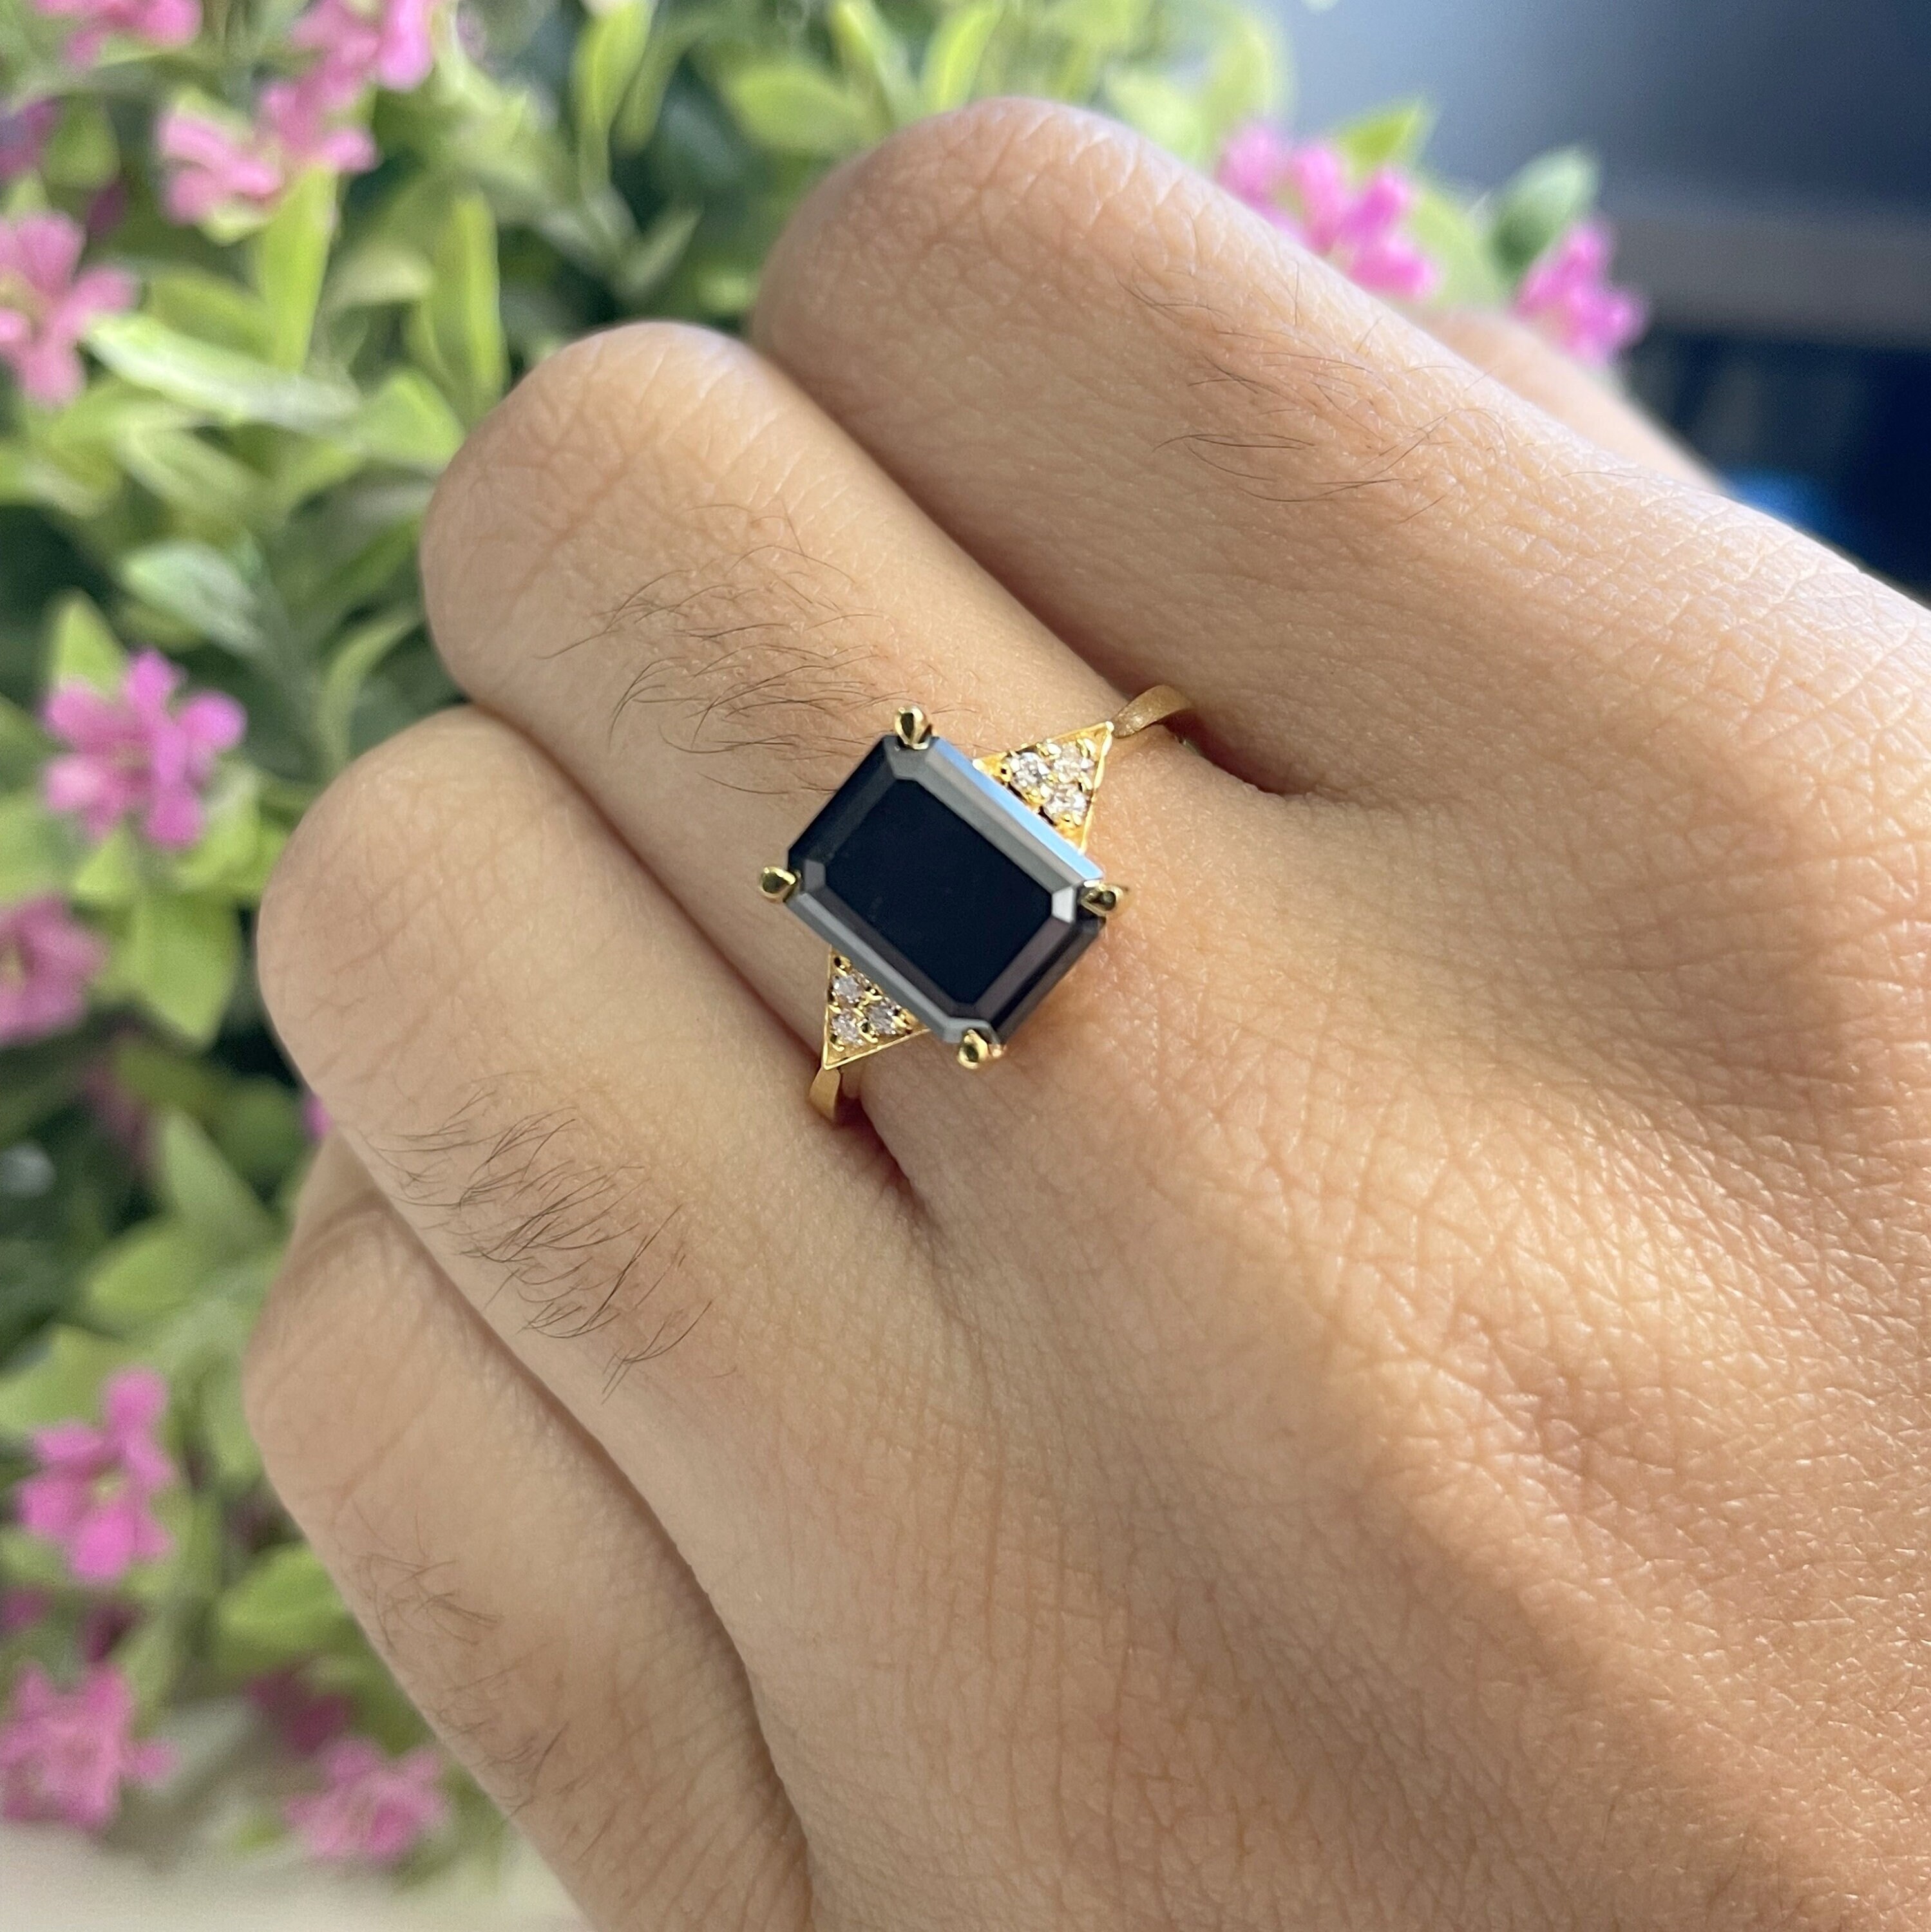 Mytys Vintage Womens Silver Cocktail Rings Round Cut Black Onyx Marcasite Anniversary Promise Wedding Band Engagement Ring 